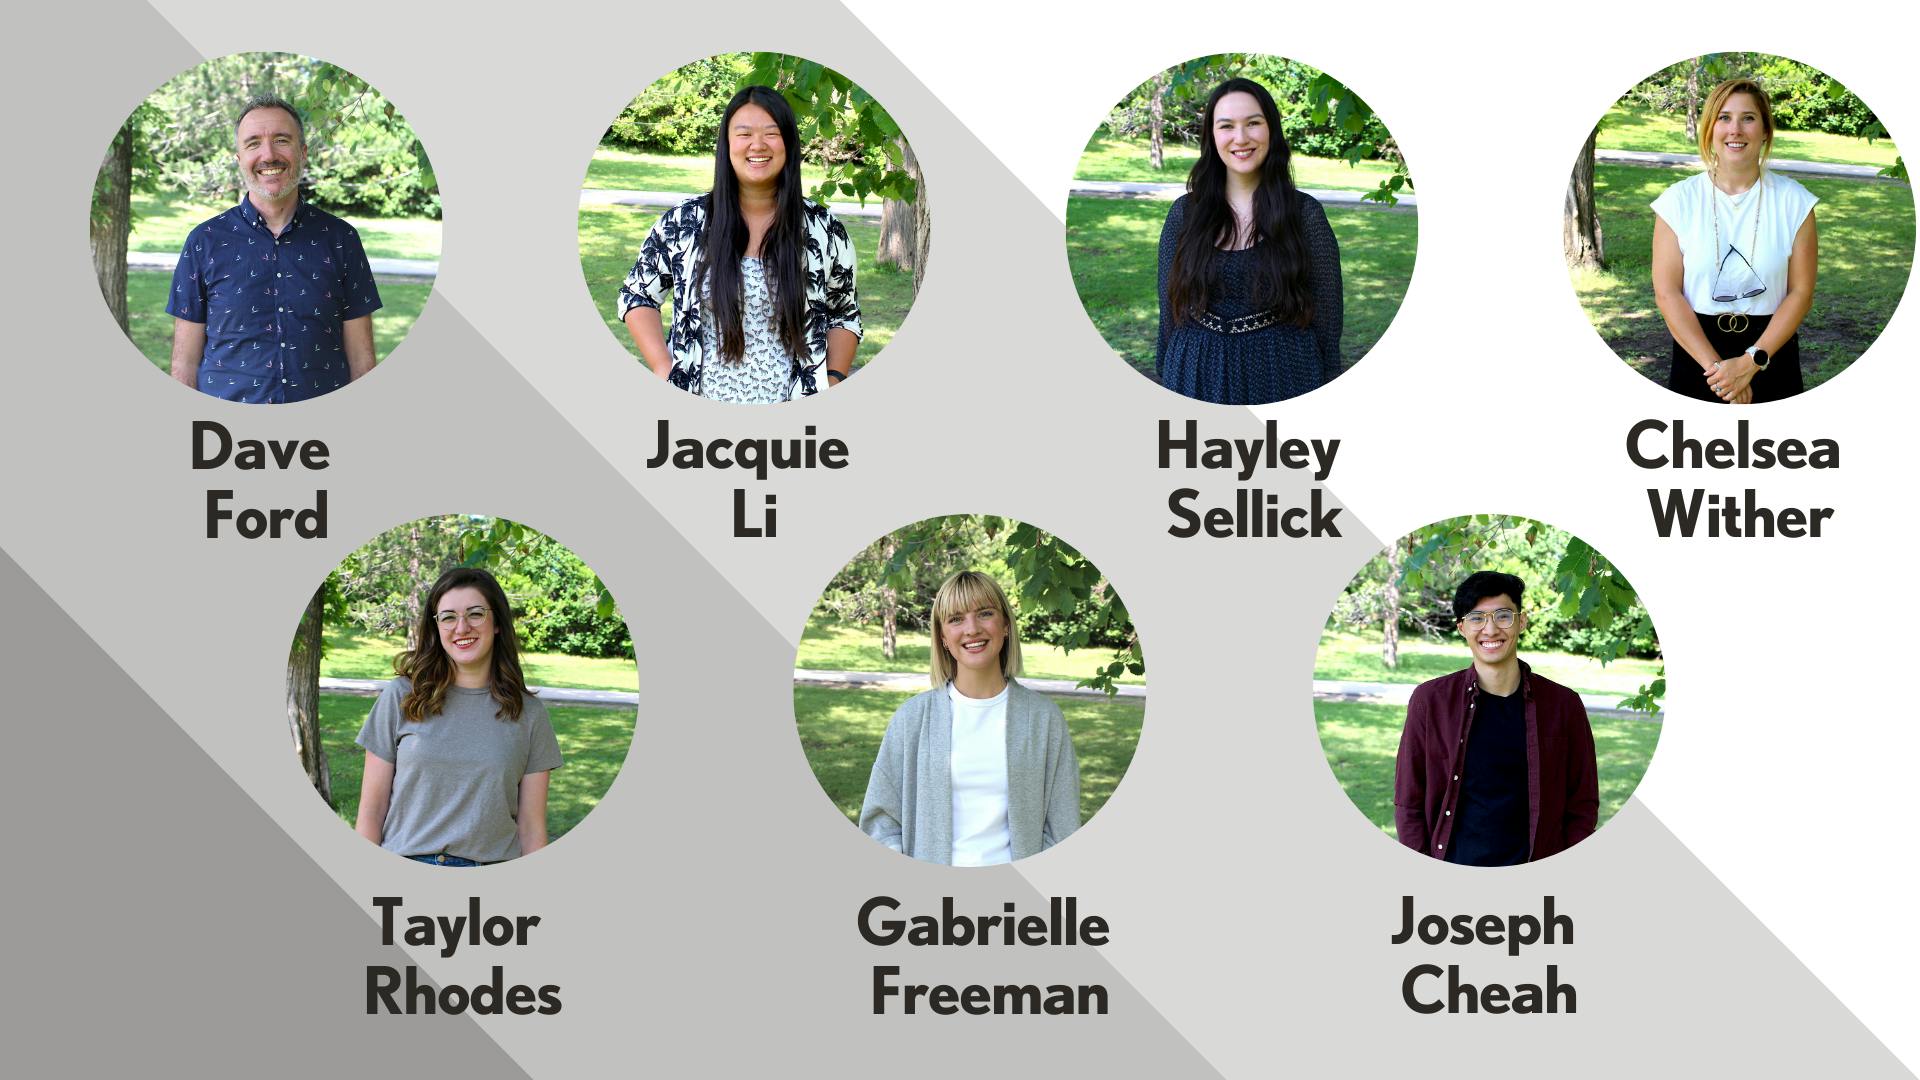 staff photos with names of staff: Dave Ford, Jacquie Li, Hayley Sellick, Chelsea Wither, Taylor Rhodes, Gabrielle Freeman, Joseph Cheah